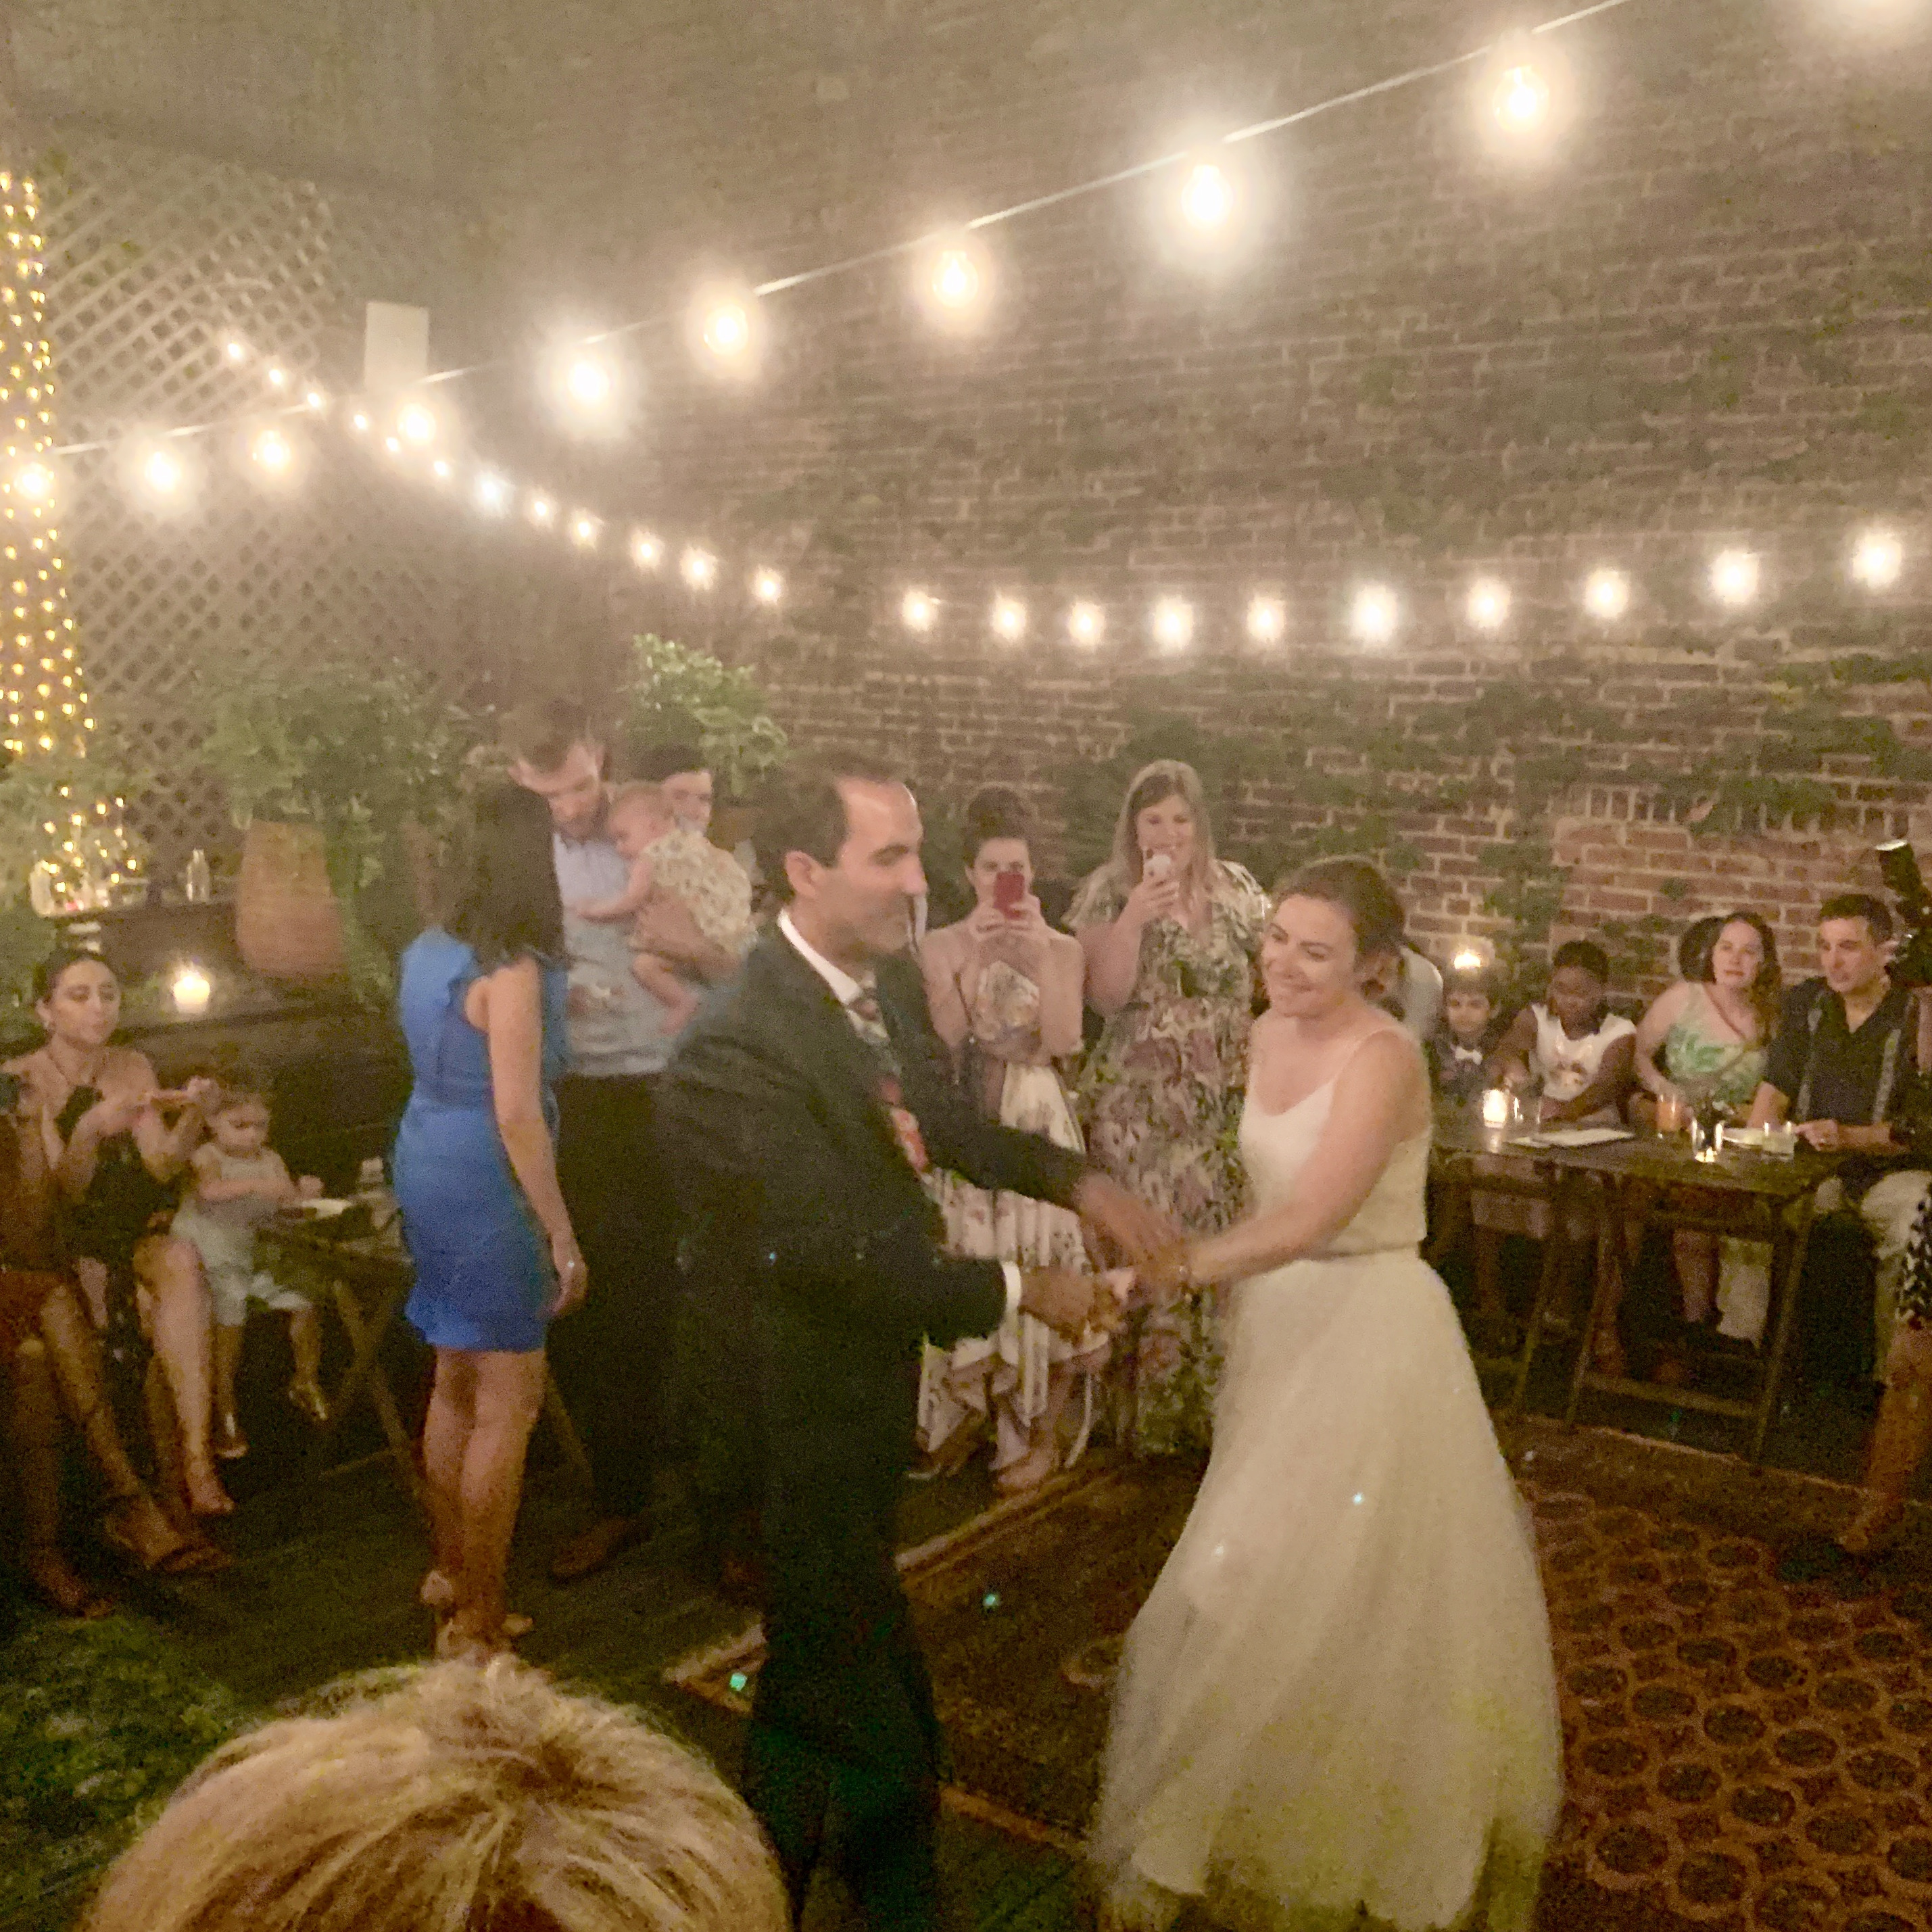 Our first dance to Beyonce's XO.